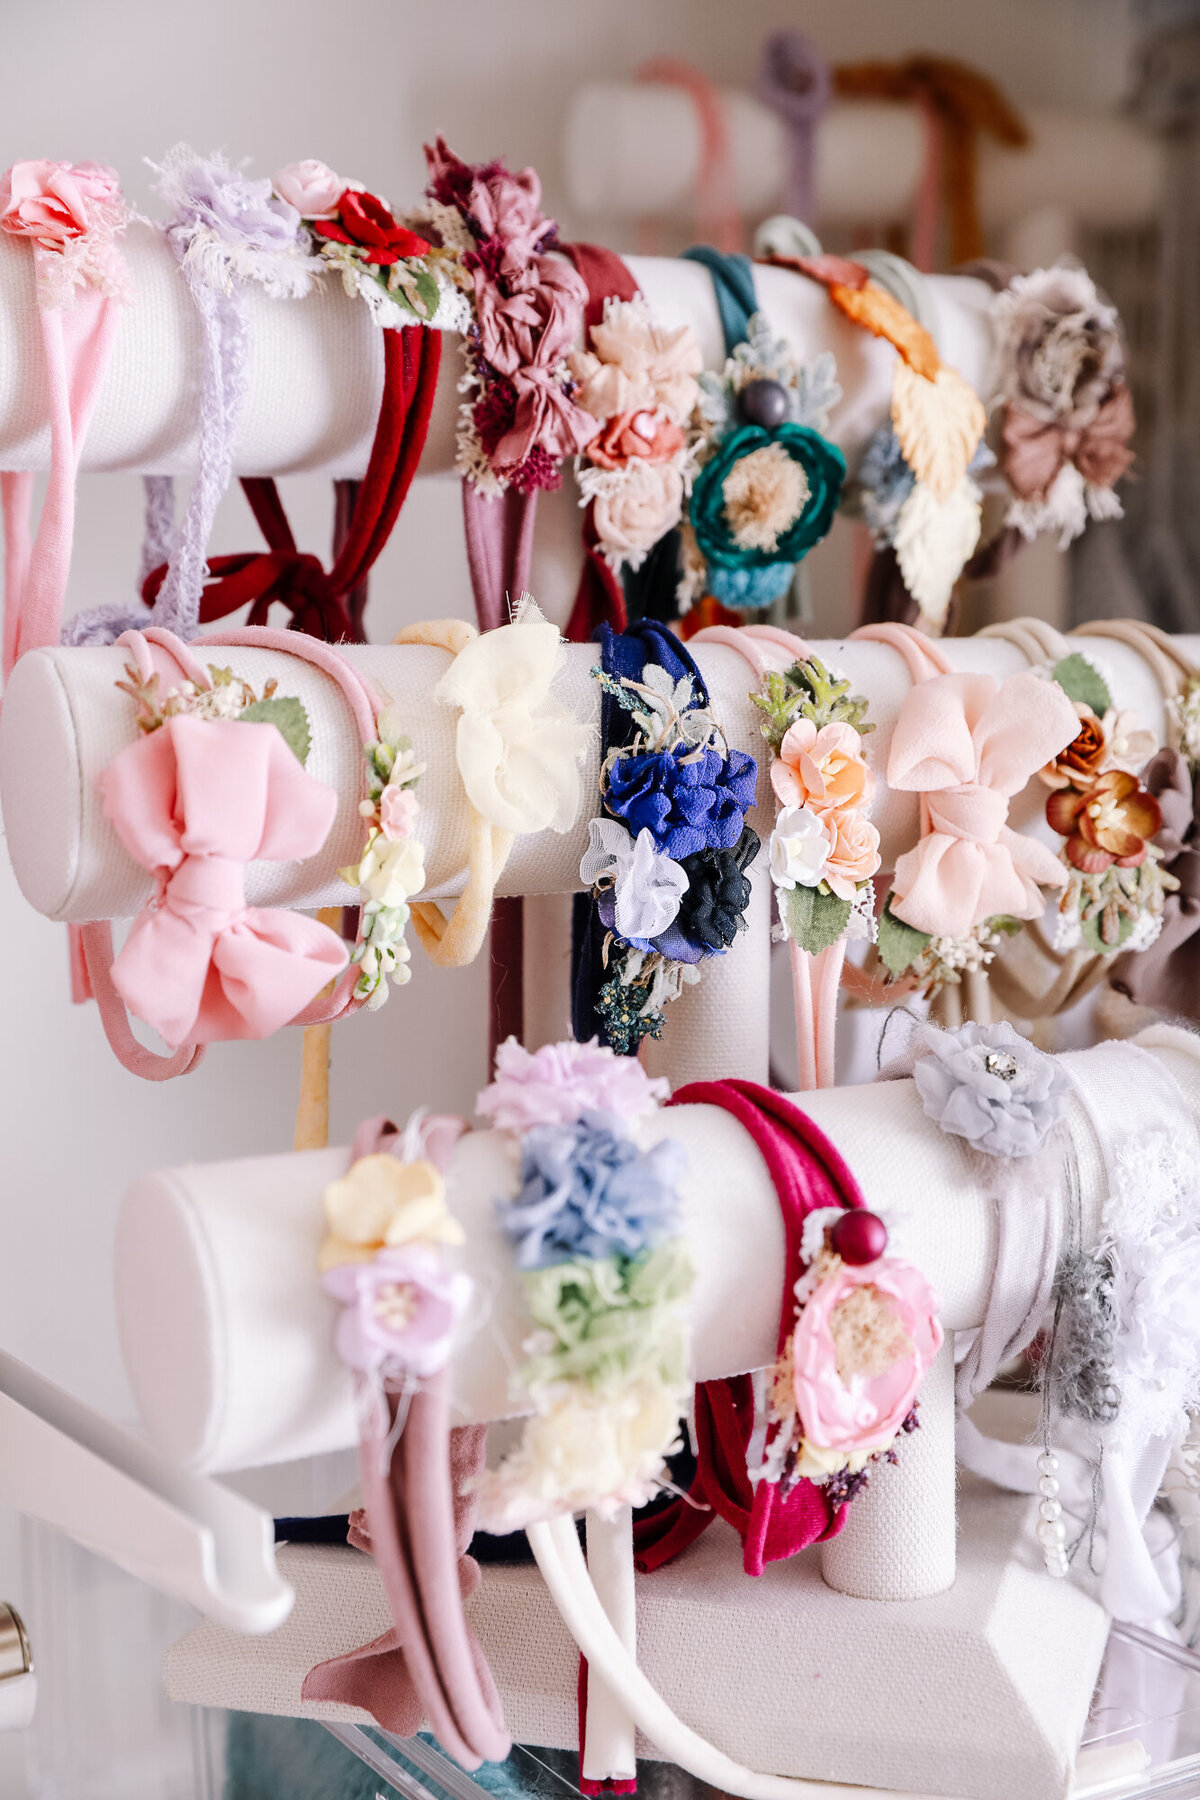 Darling little bows and headbands for newborns